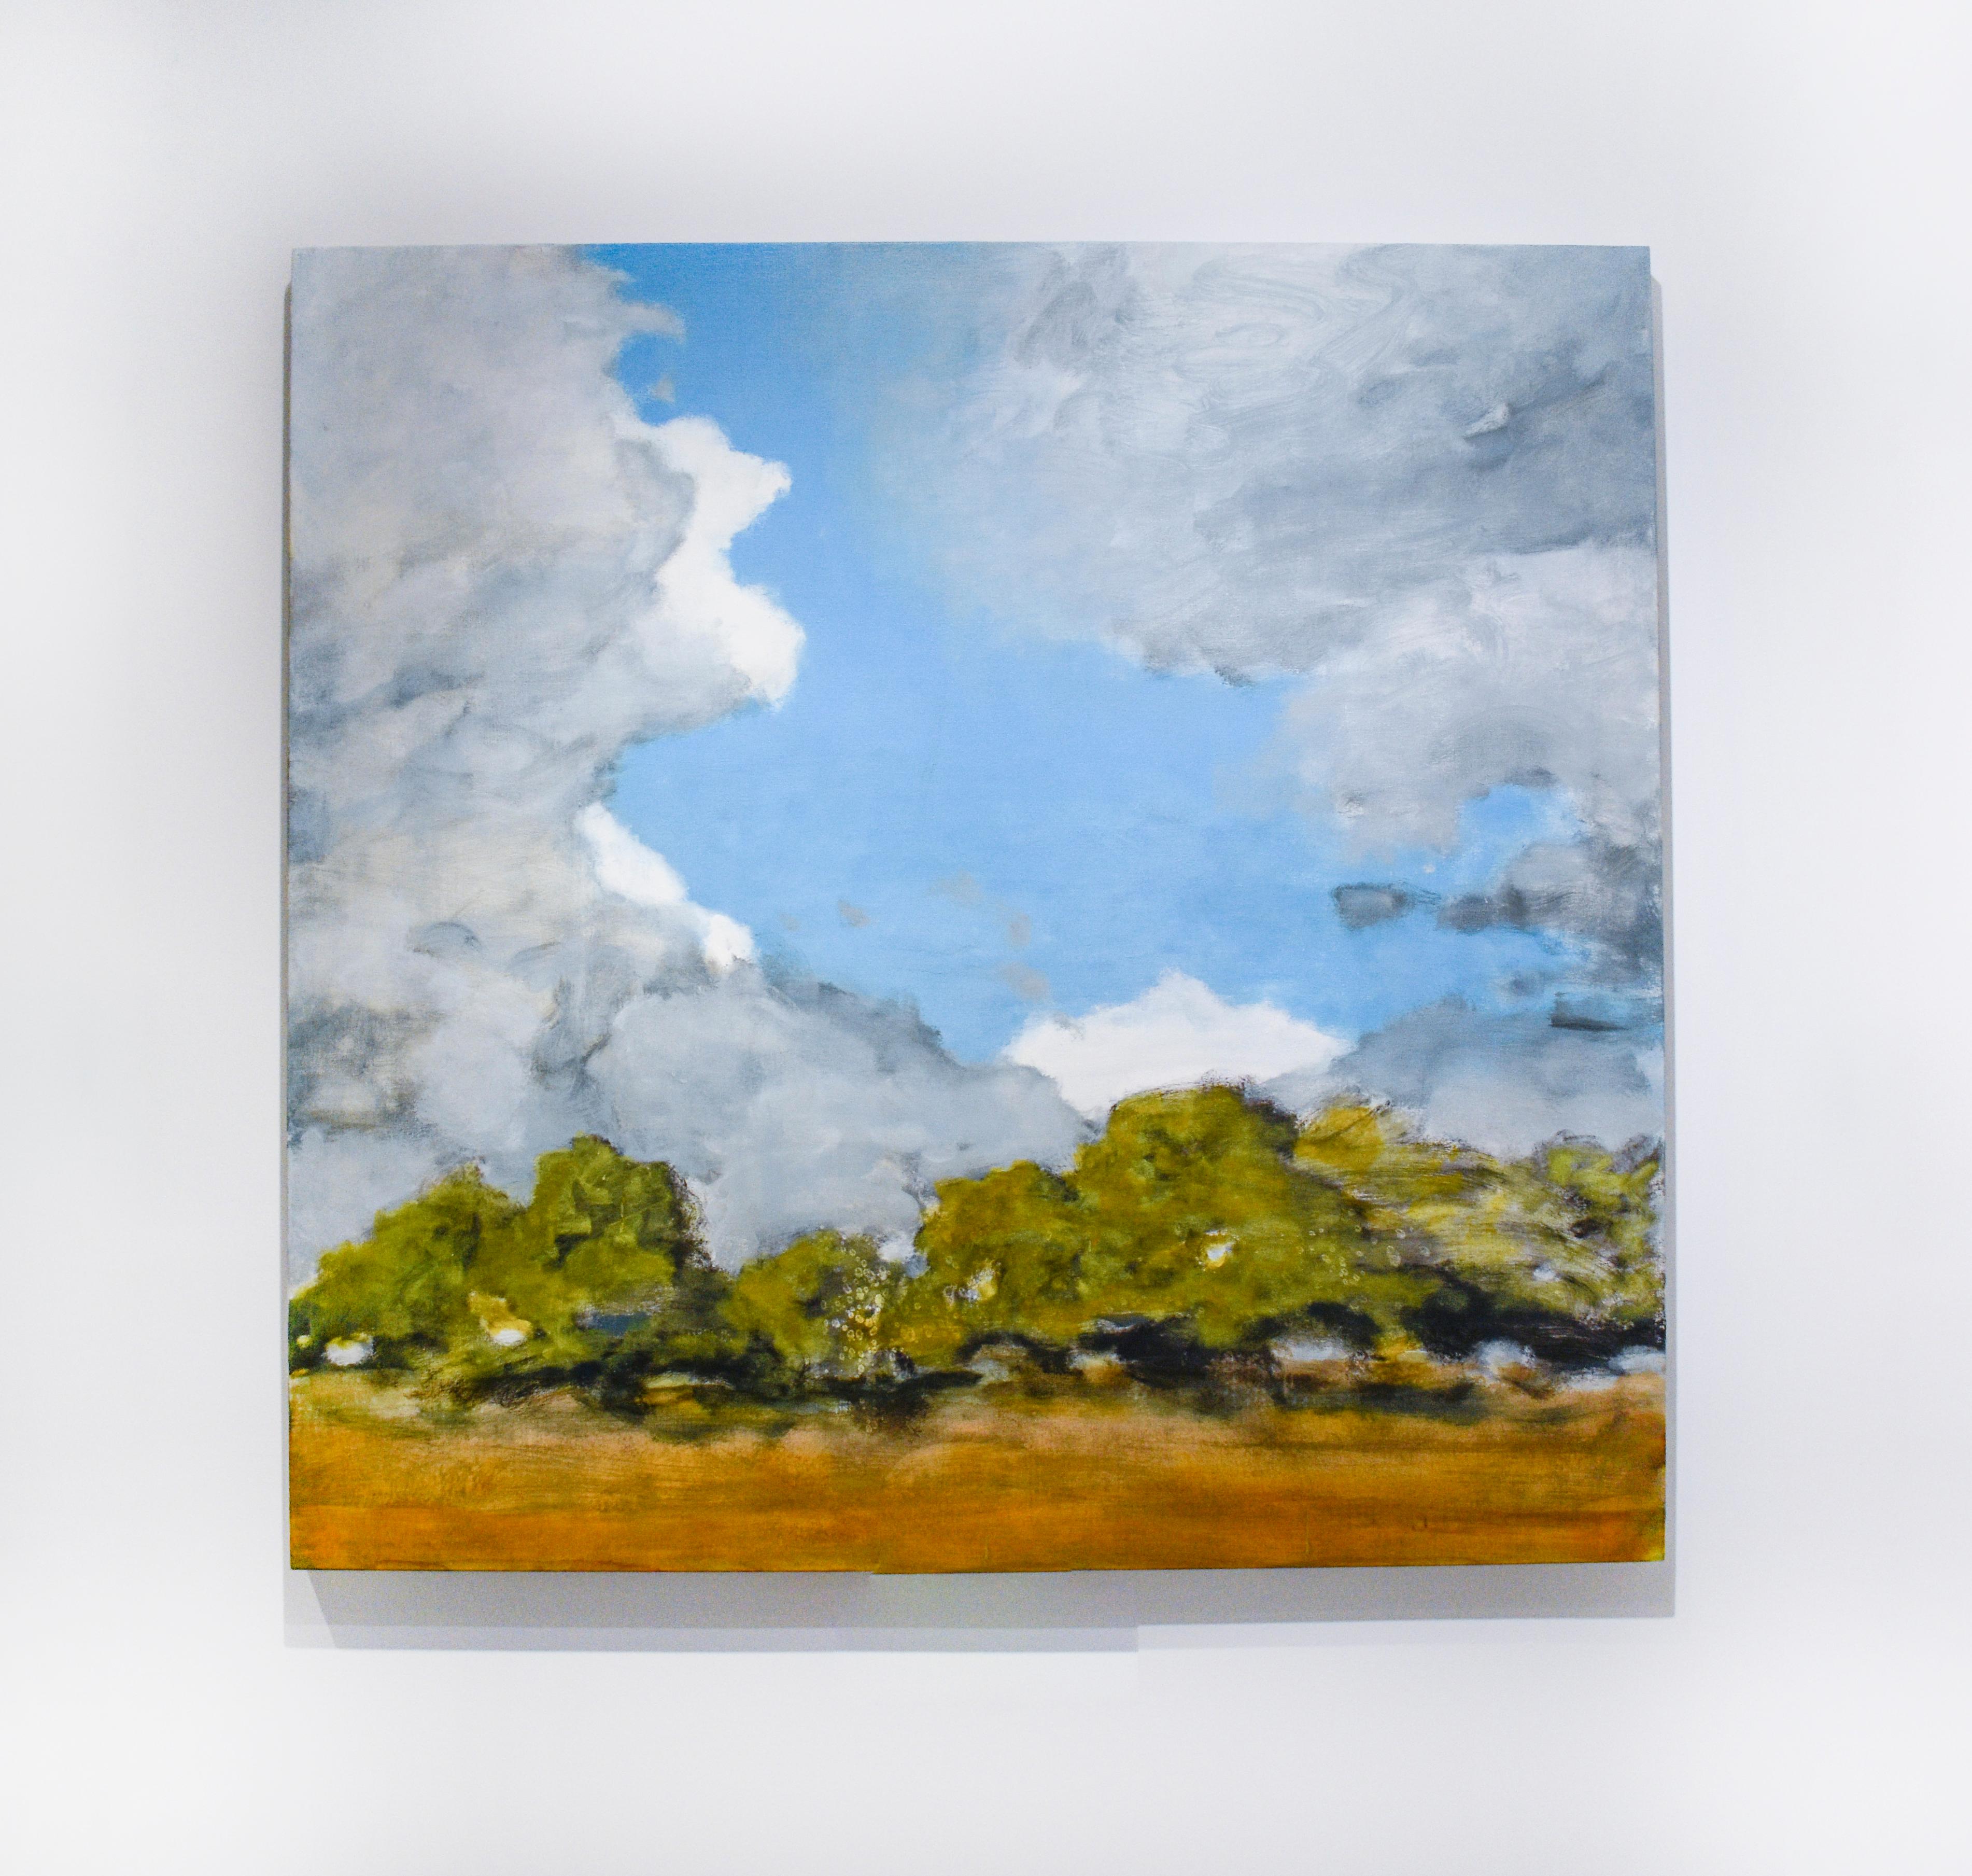 Clearing: Abstract Landscape of Country Field Under Blue Sky By D. Konigsberg - Painting by David Konigsberg